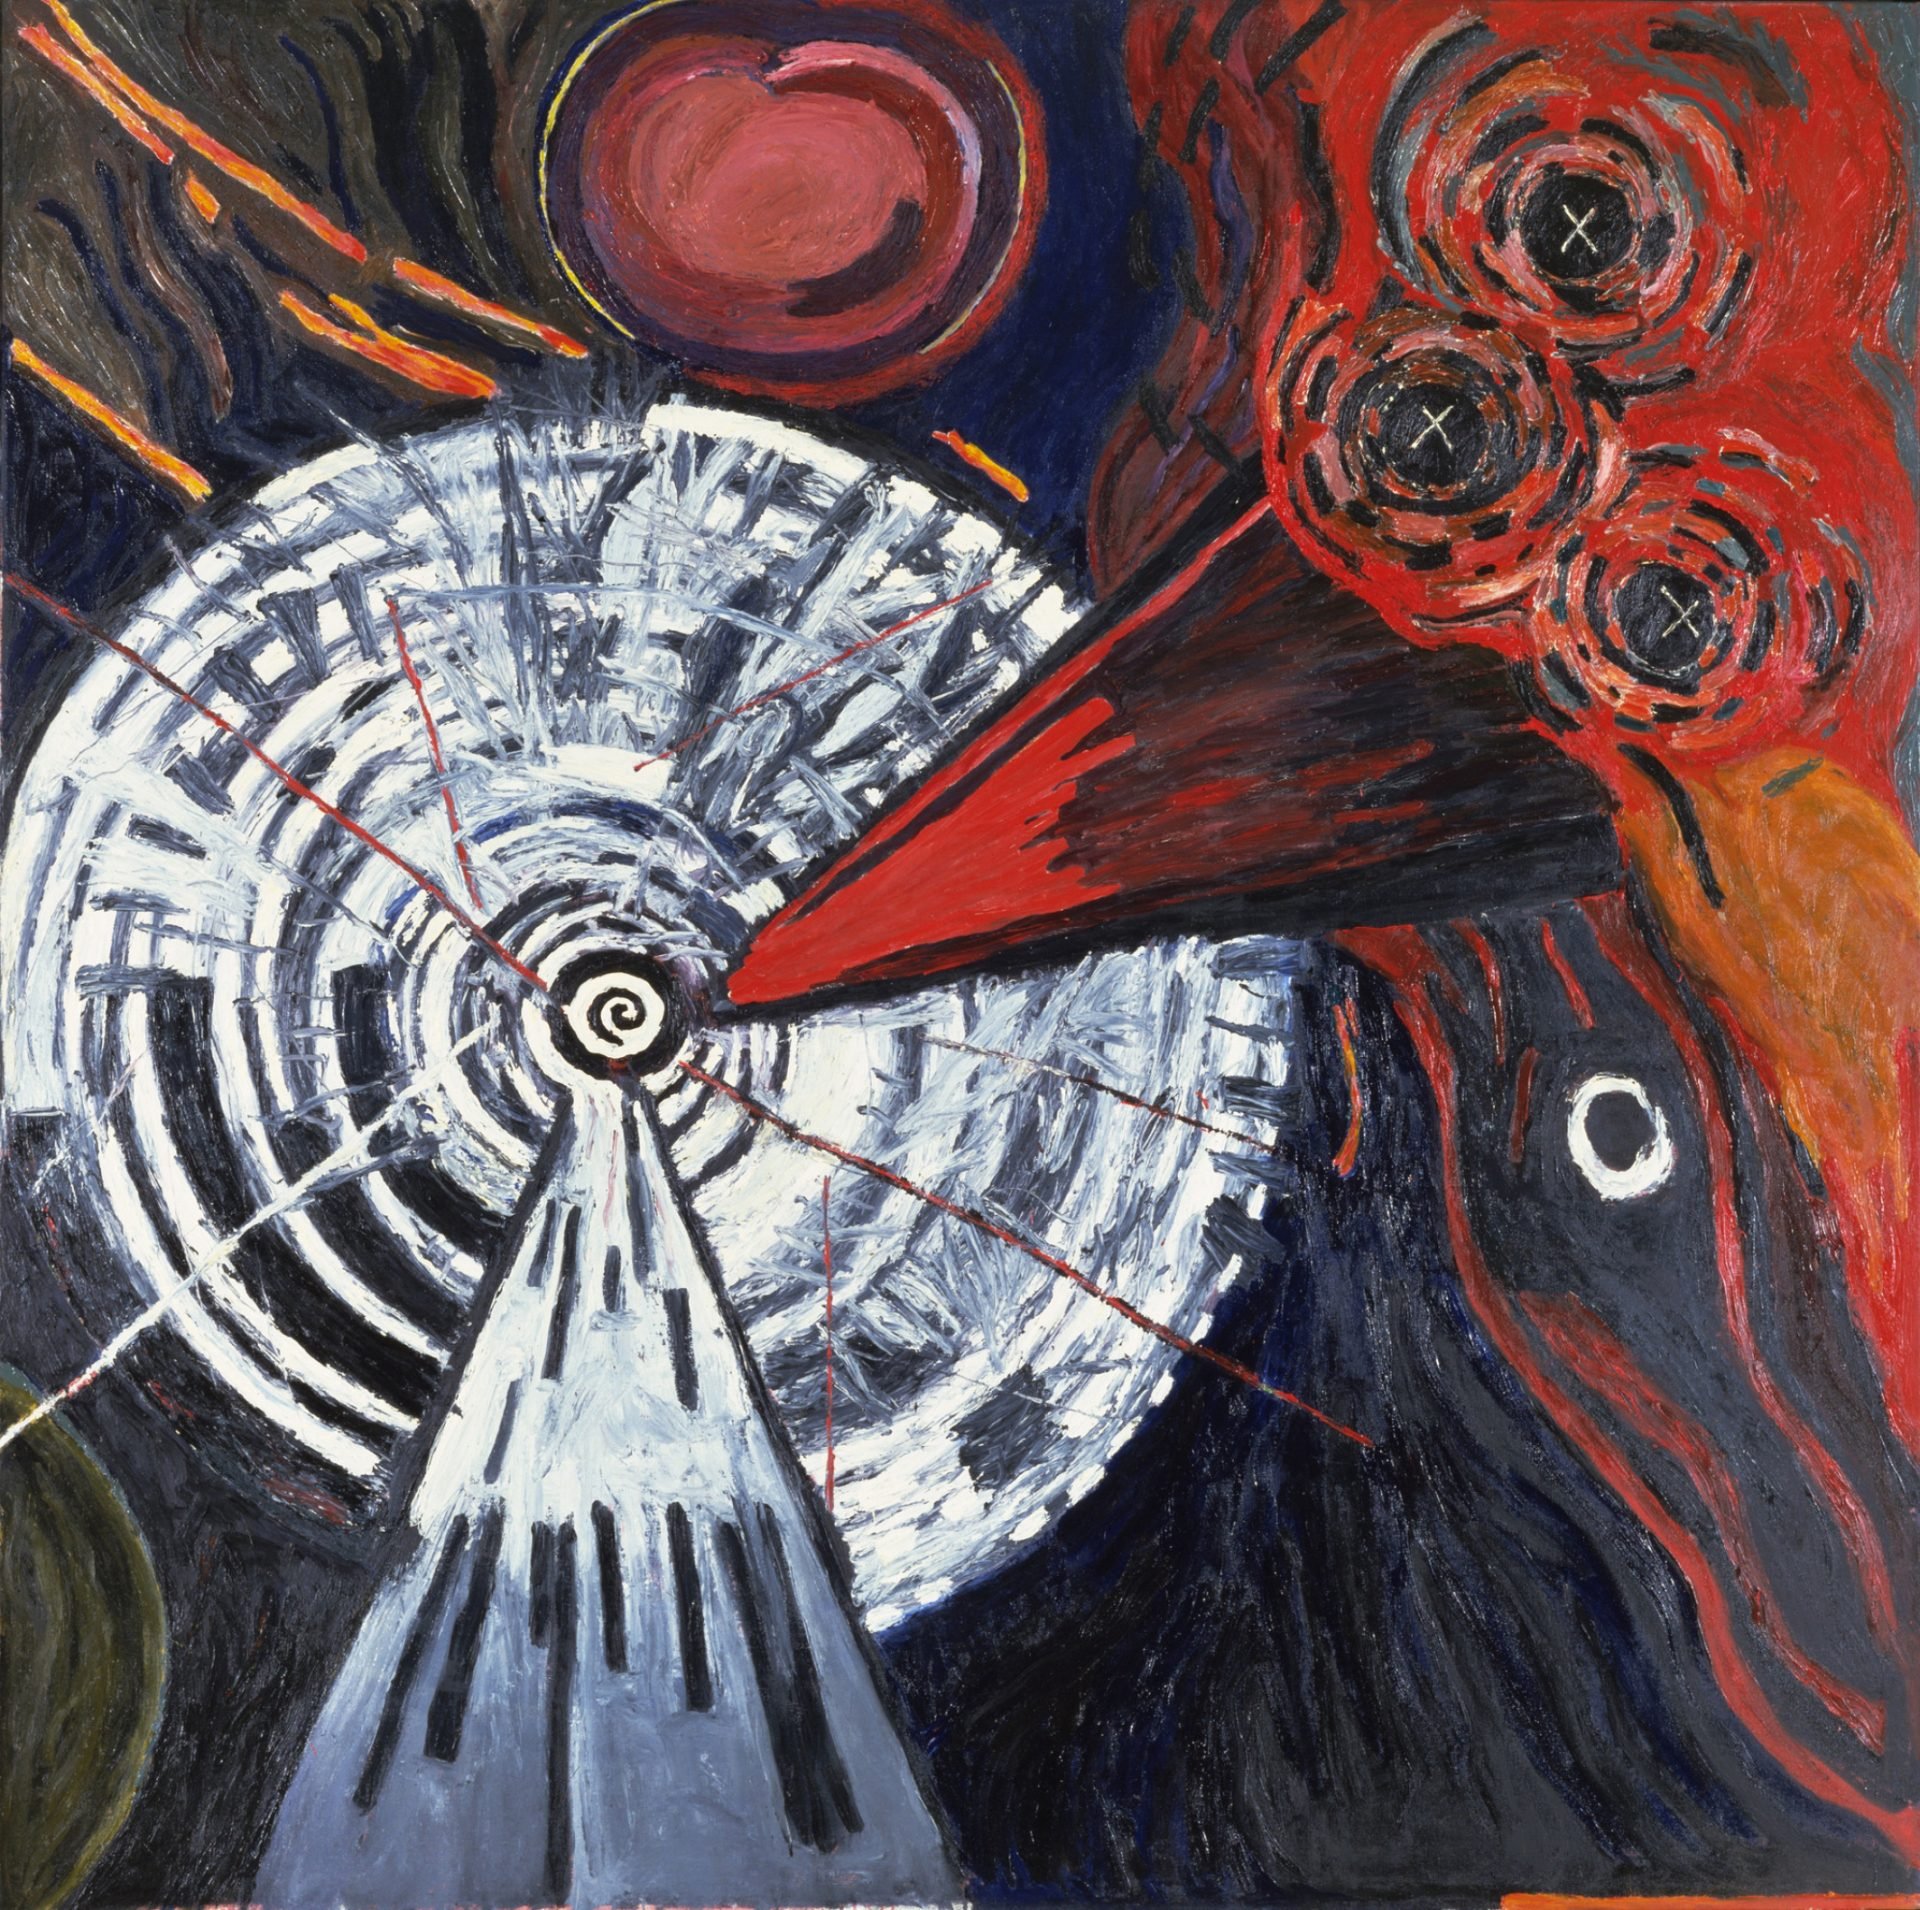 "I am an American... Uneasy Dreams" by Katherine Porter, 1981, an abstract painting with a central spiral and radiating red and black forms, embodying a dynamic and radiant composition.